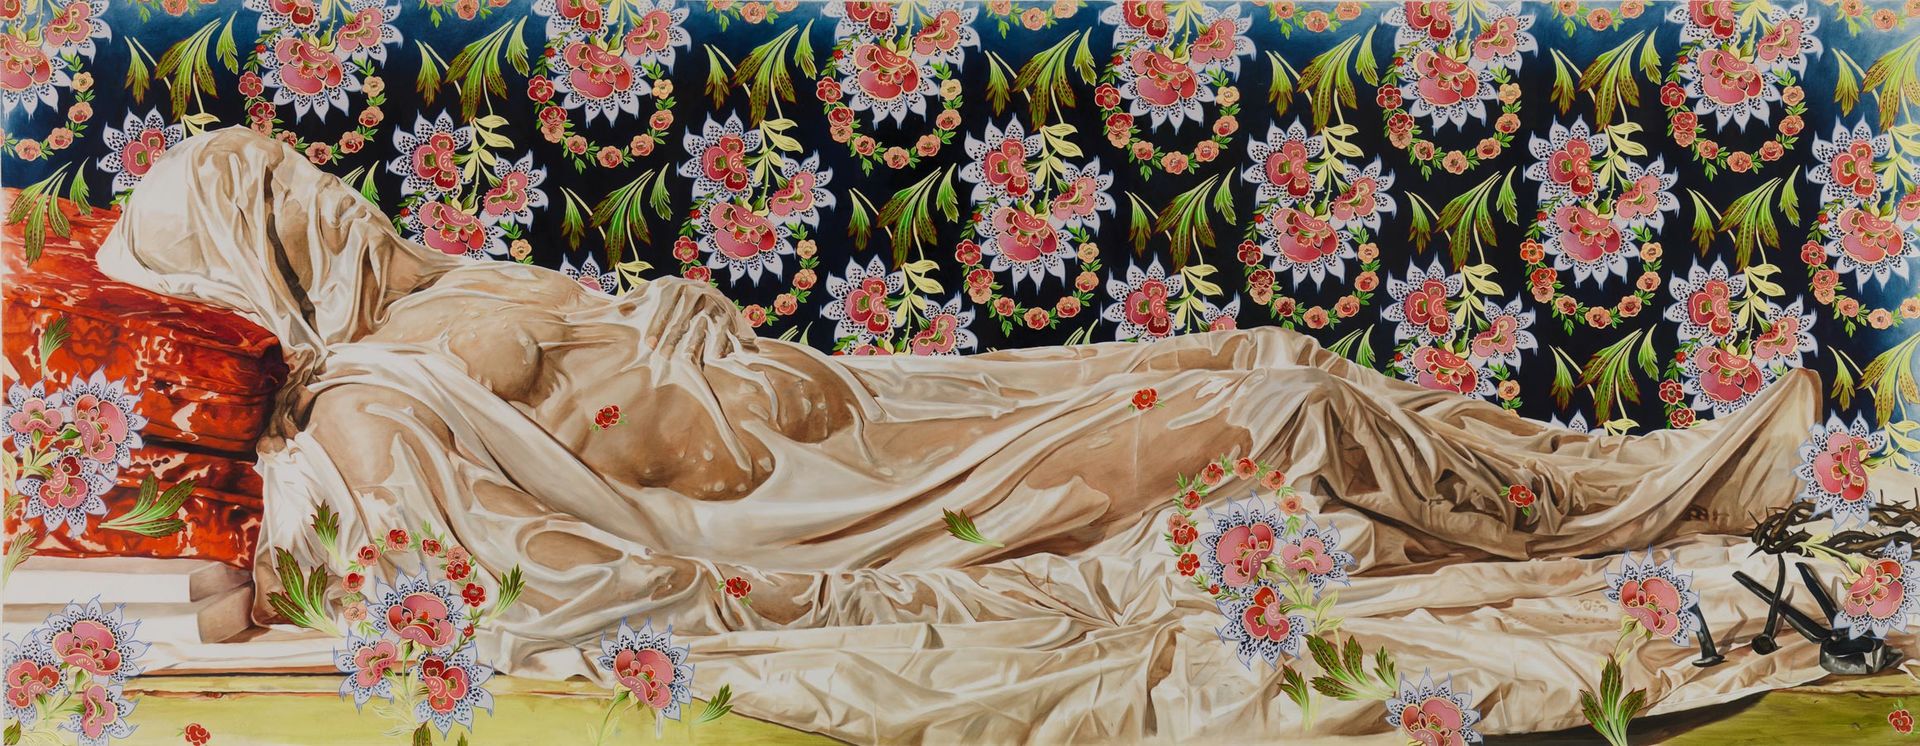 A study for "The Veiled Christ" by Kehinde Wiley, showing a figure in repose wrapped in a winding sheet with wildflowers strewn about